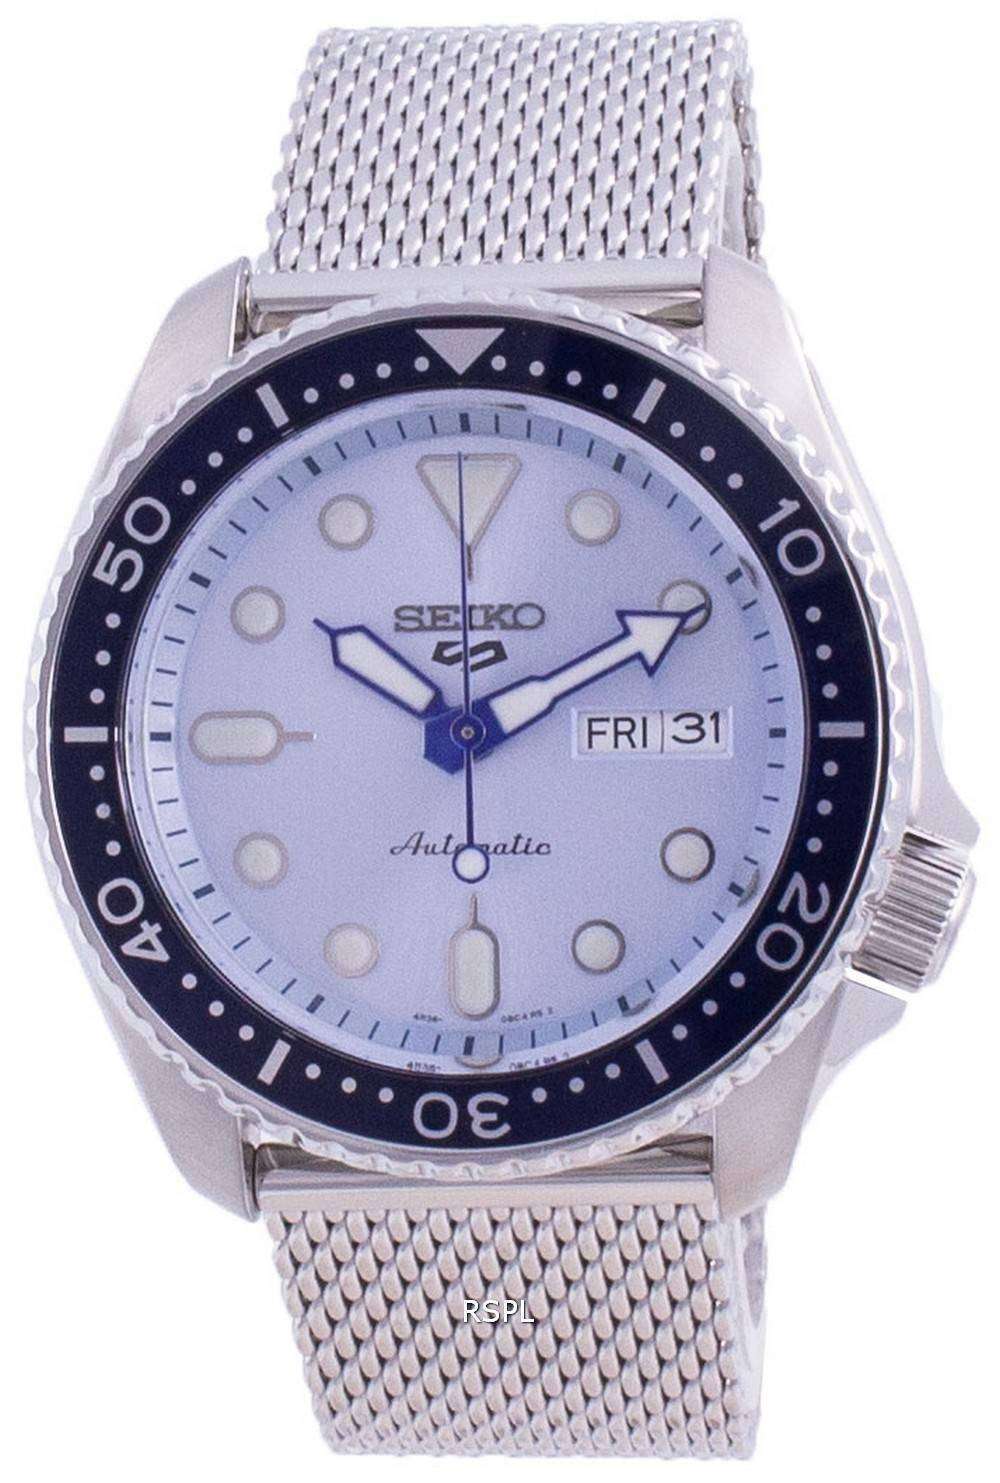 Seiko 5 Sports Suits Style Automatic Srpe77 Srpe77k1 Srpe77k 100m Mens Watch Citywatches Ie